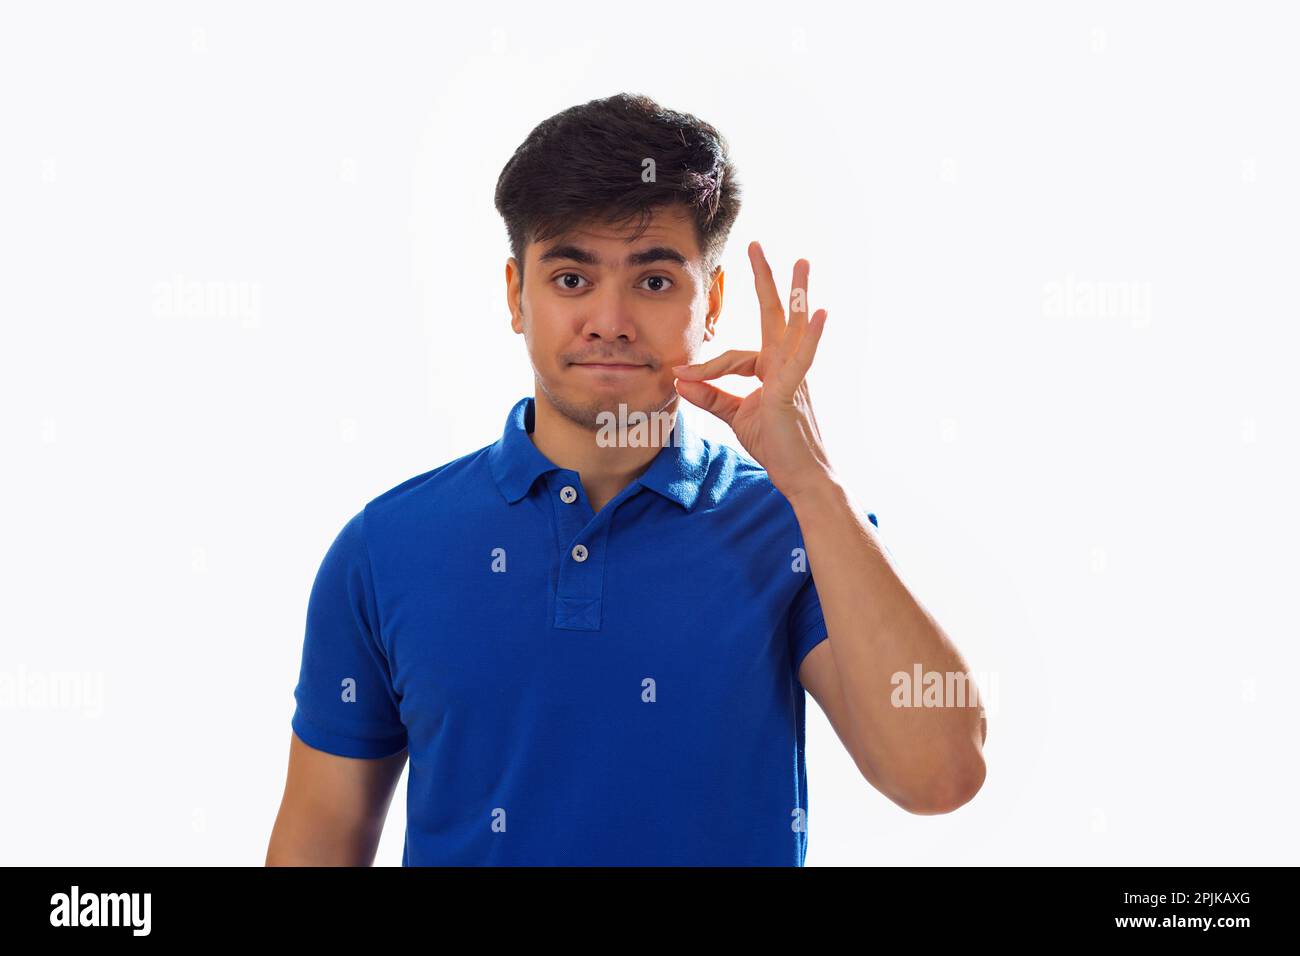 Portrait of young man gesturing against white background Stock Photo